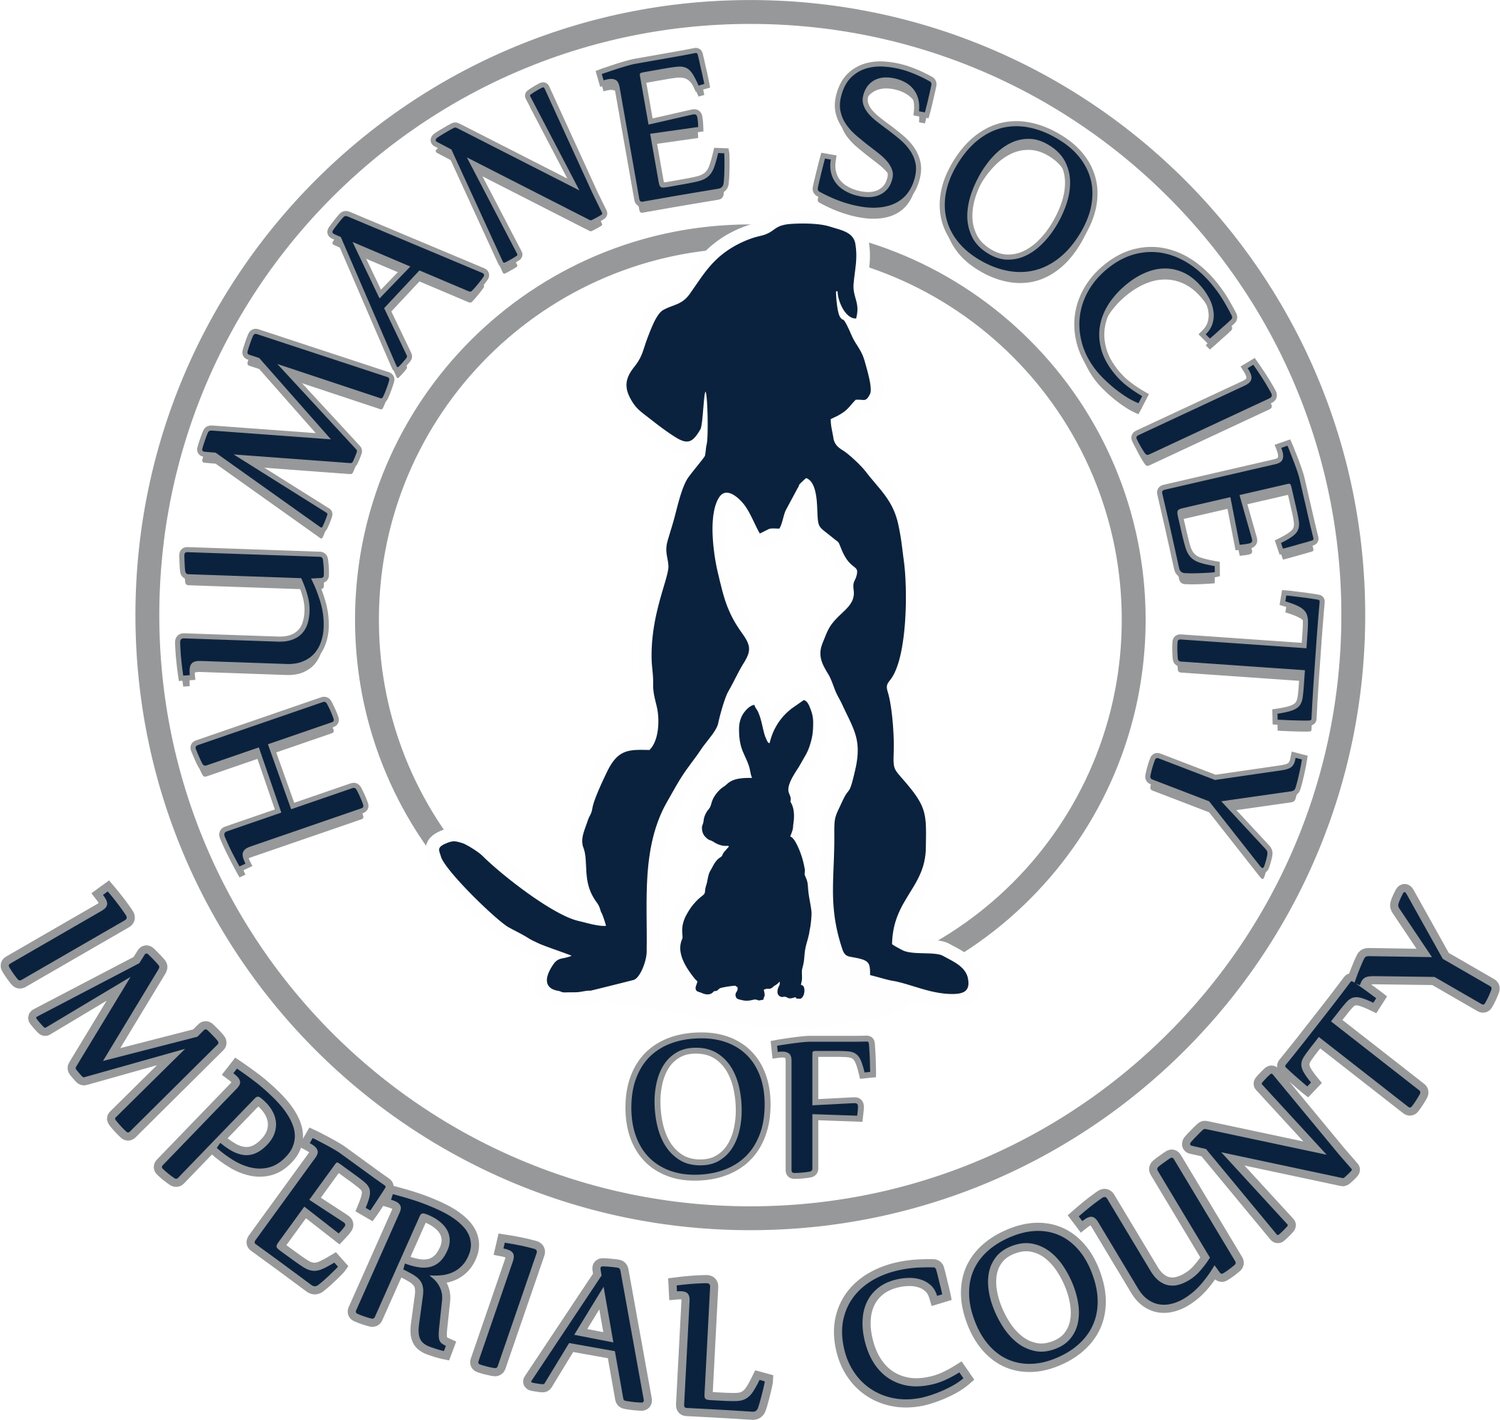 Humane society el centro evidence of coverage carefirst